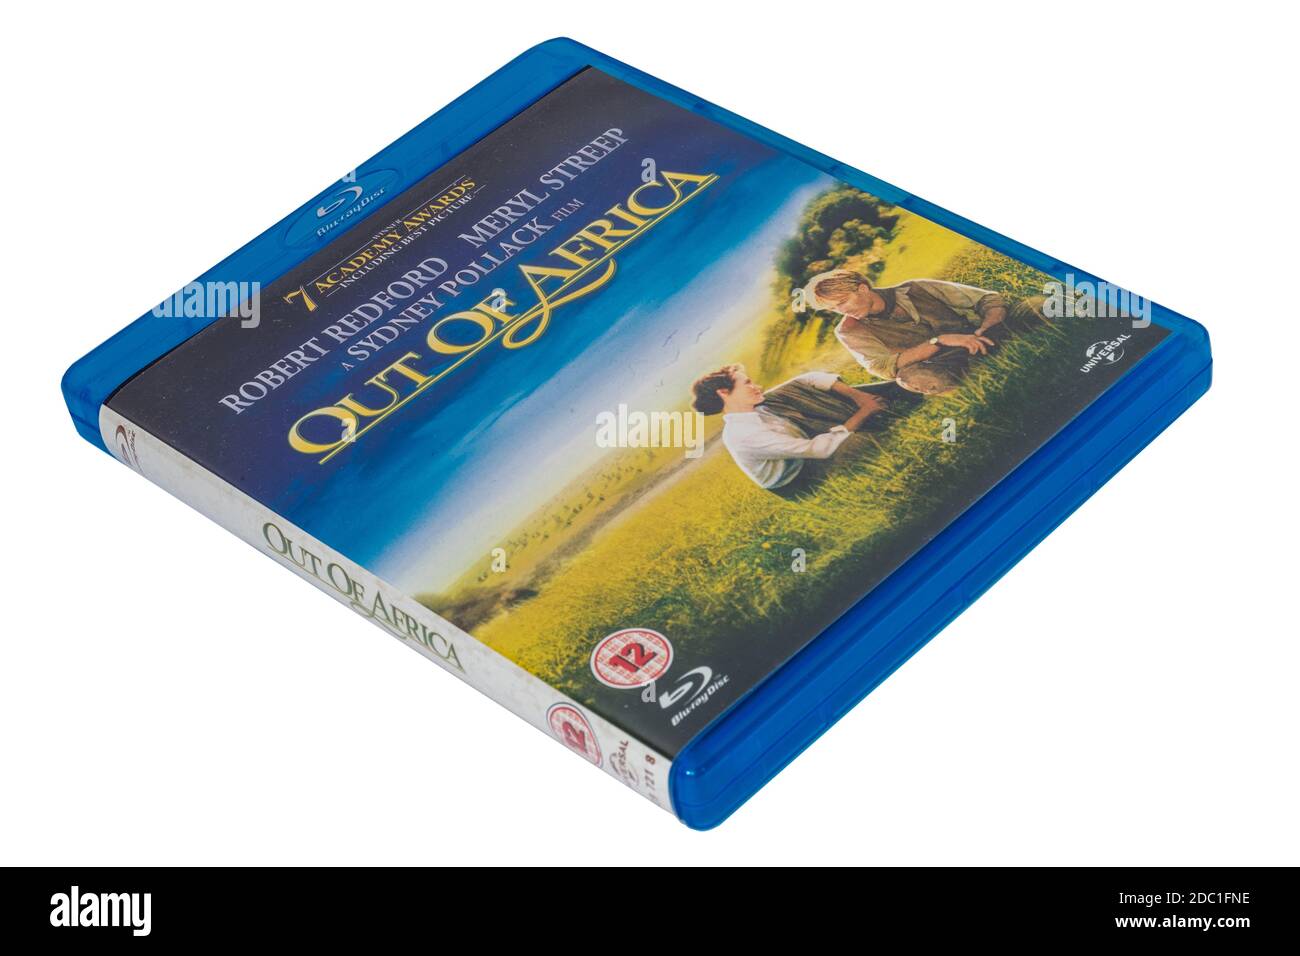 Out of Africa blu-ray Disc (DVD) Stockfoto